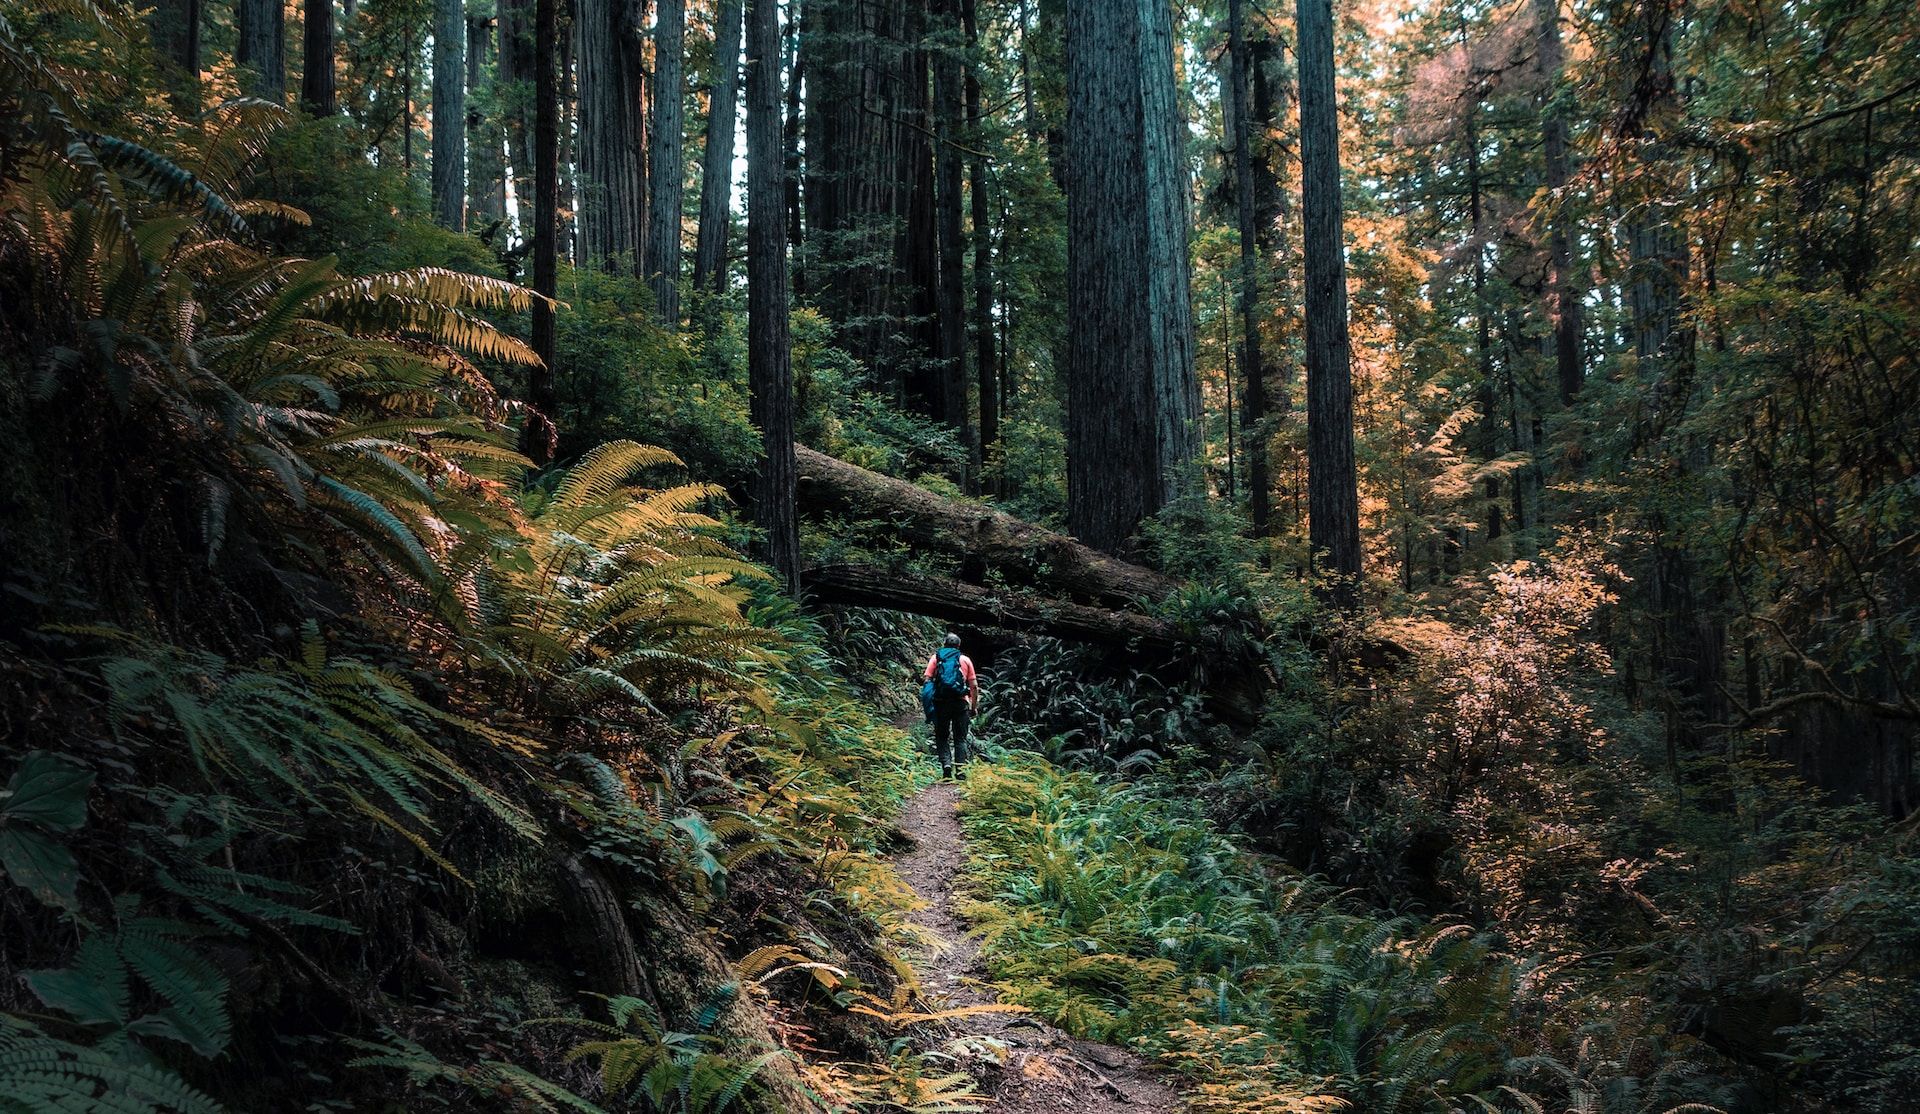 A solo hiker makes his way through the dense trees and foliage in the Redwood National Forest, California